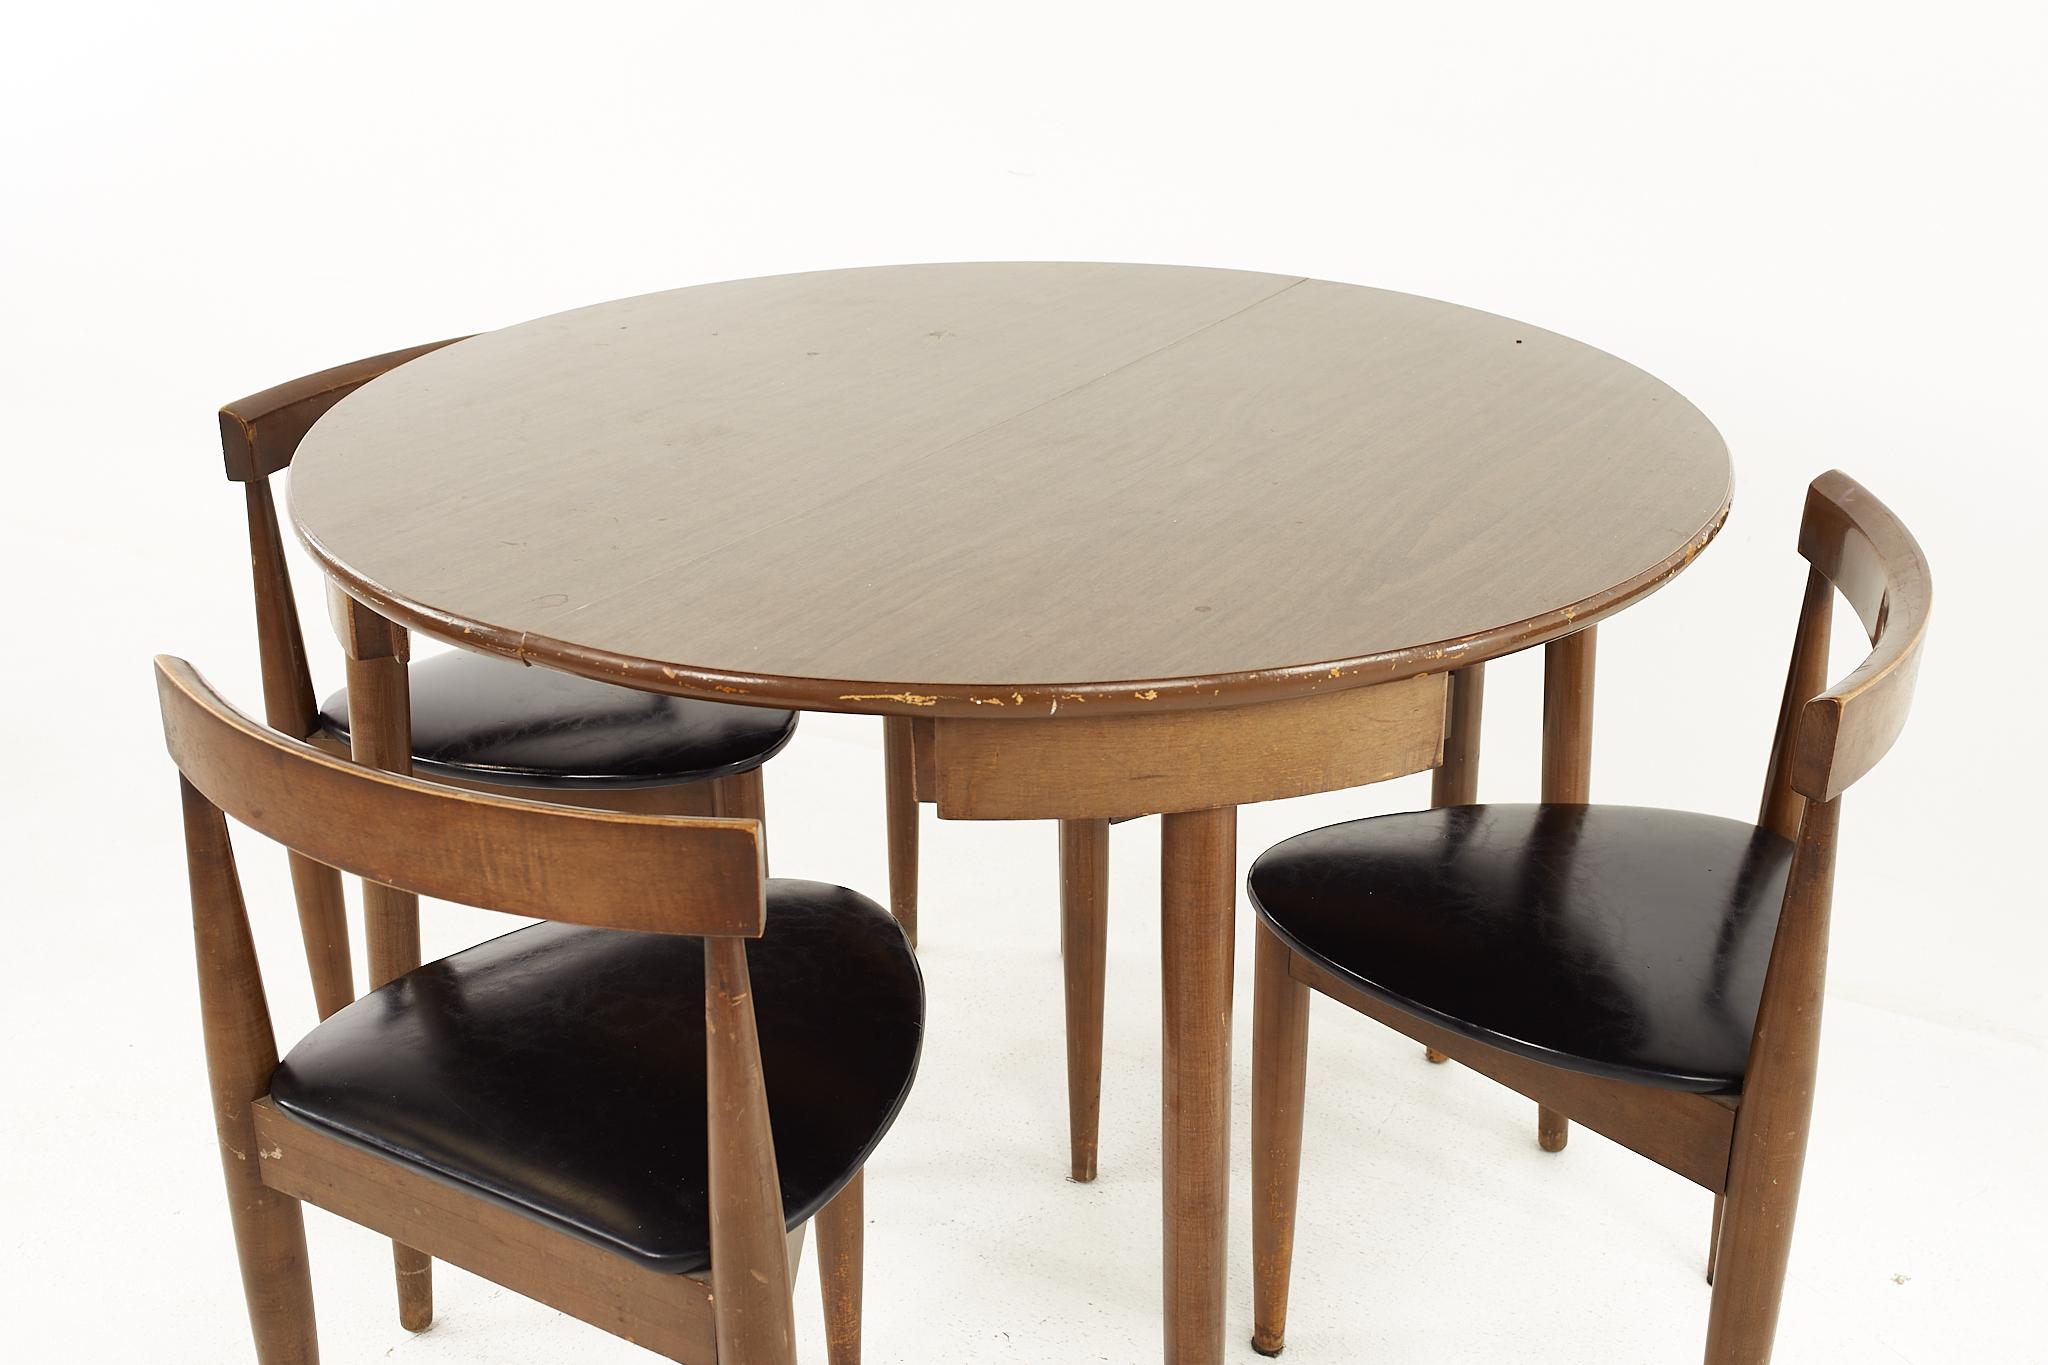 American Hans Olsen Style Walnut and Laminate Dining Table with 4 Nesting Chairs